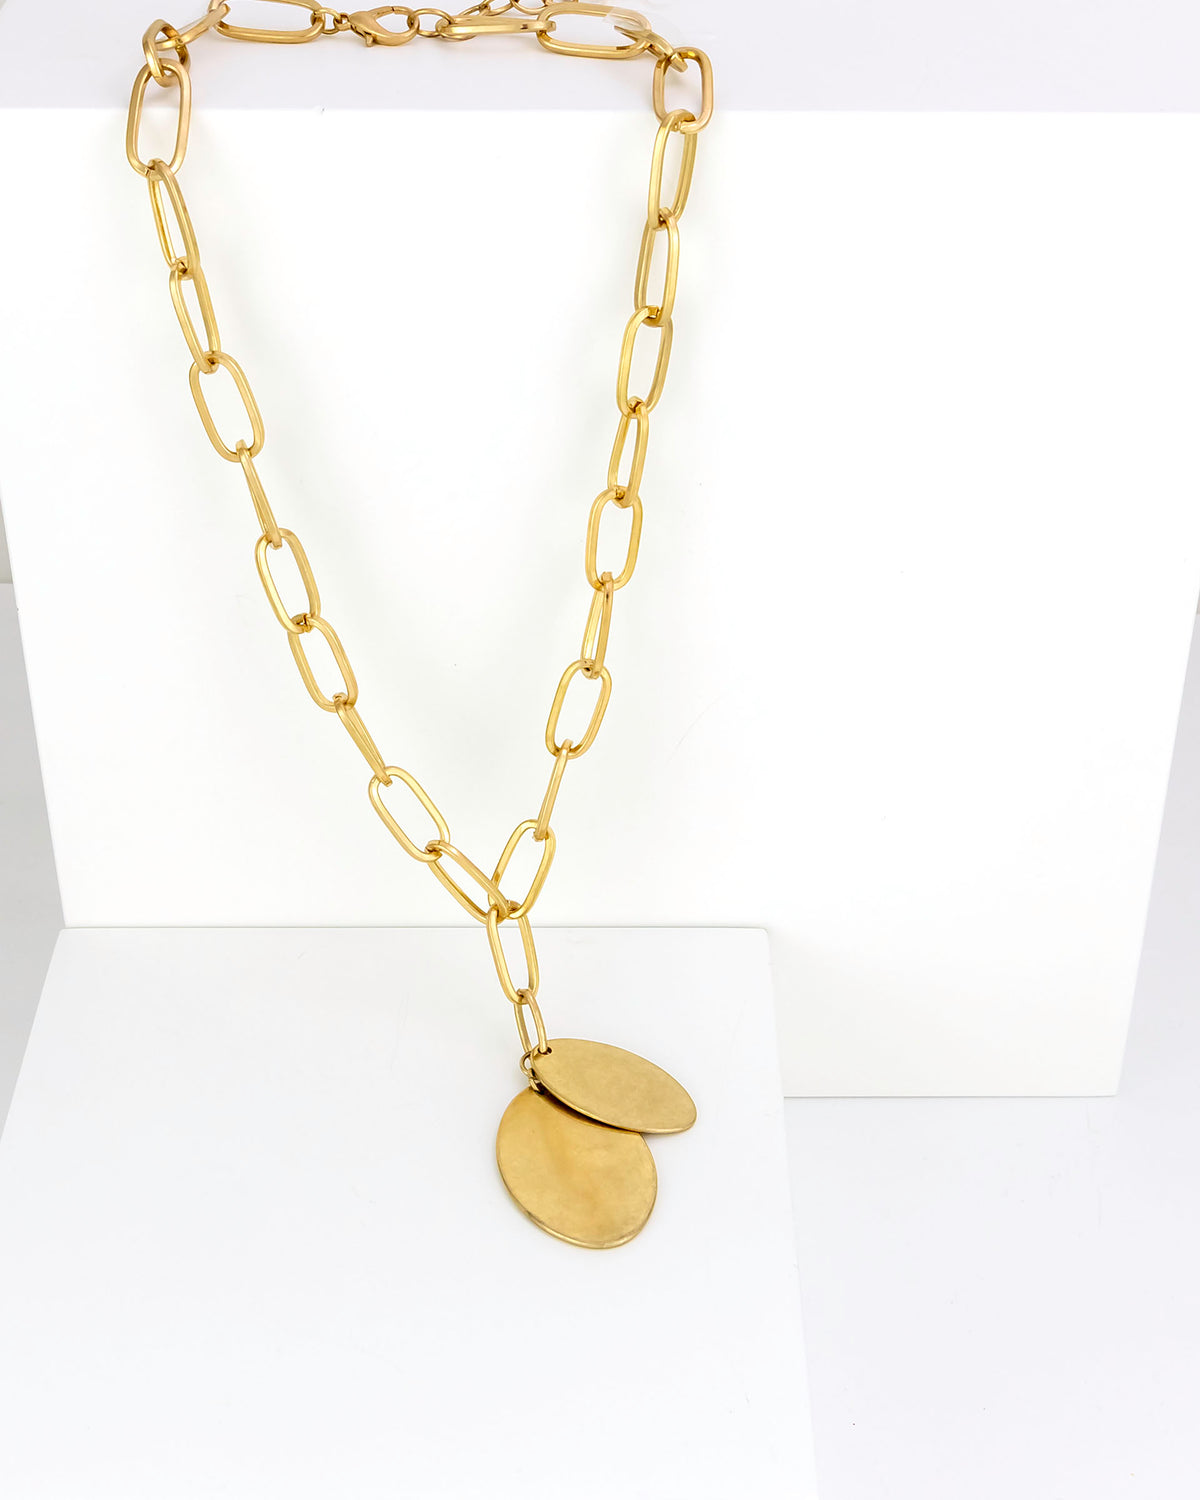 Dauplaise Jewelry - Golden Gala Linked Necklace